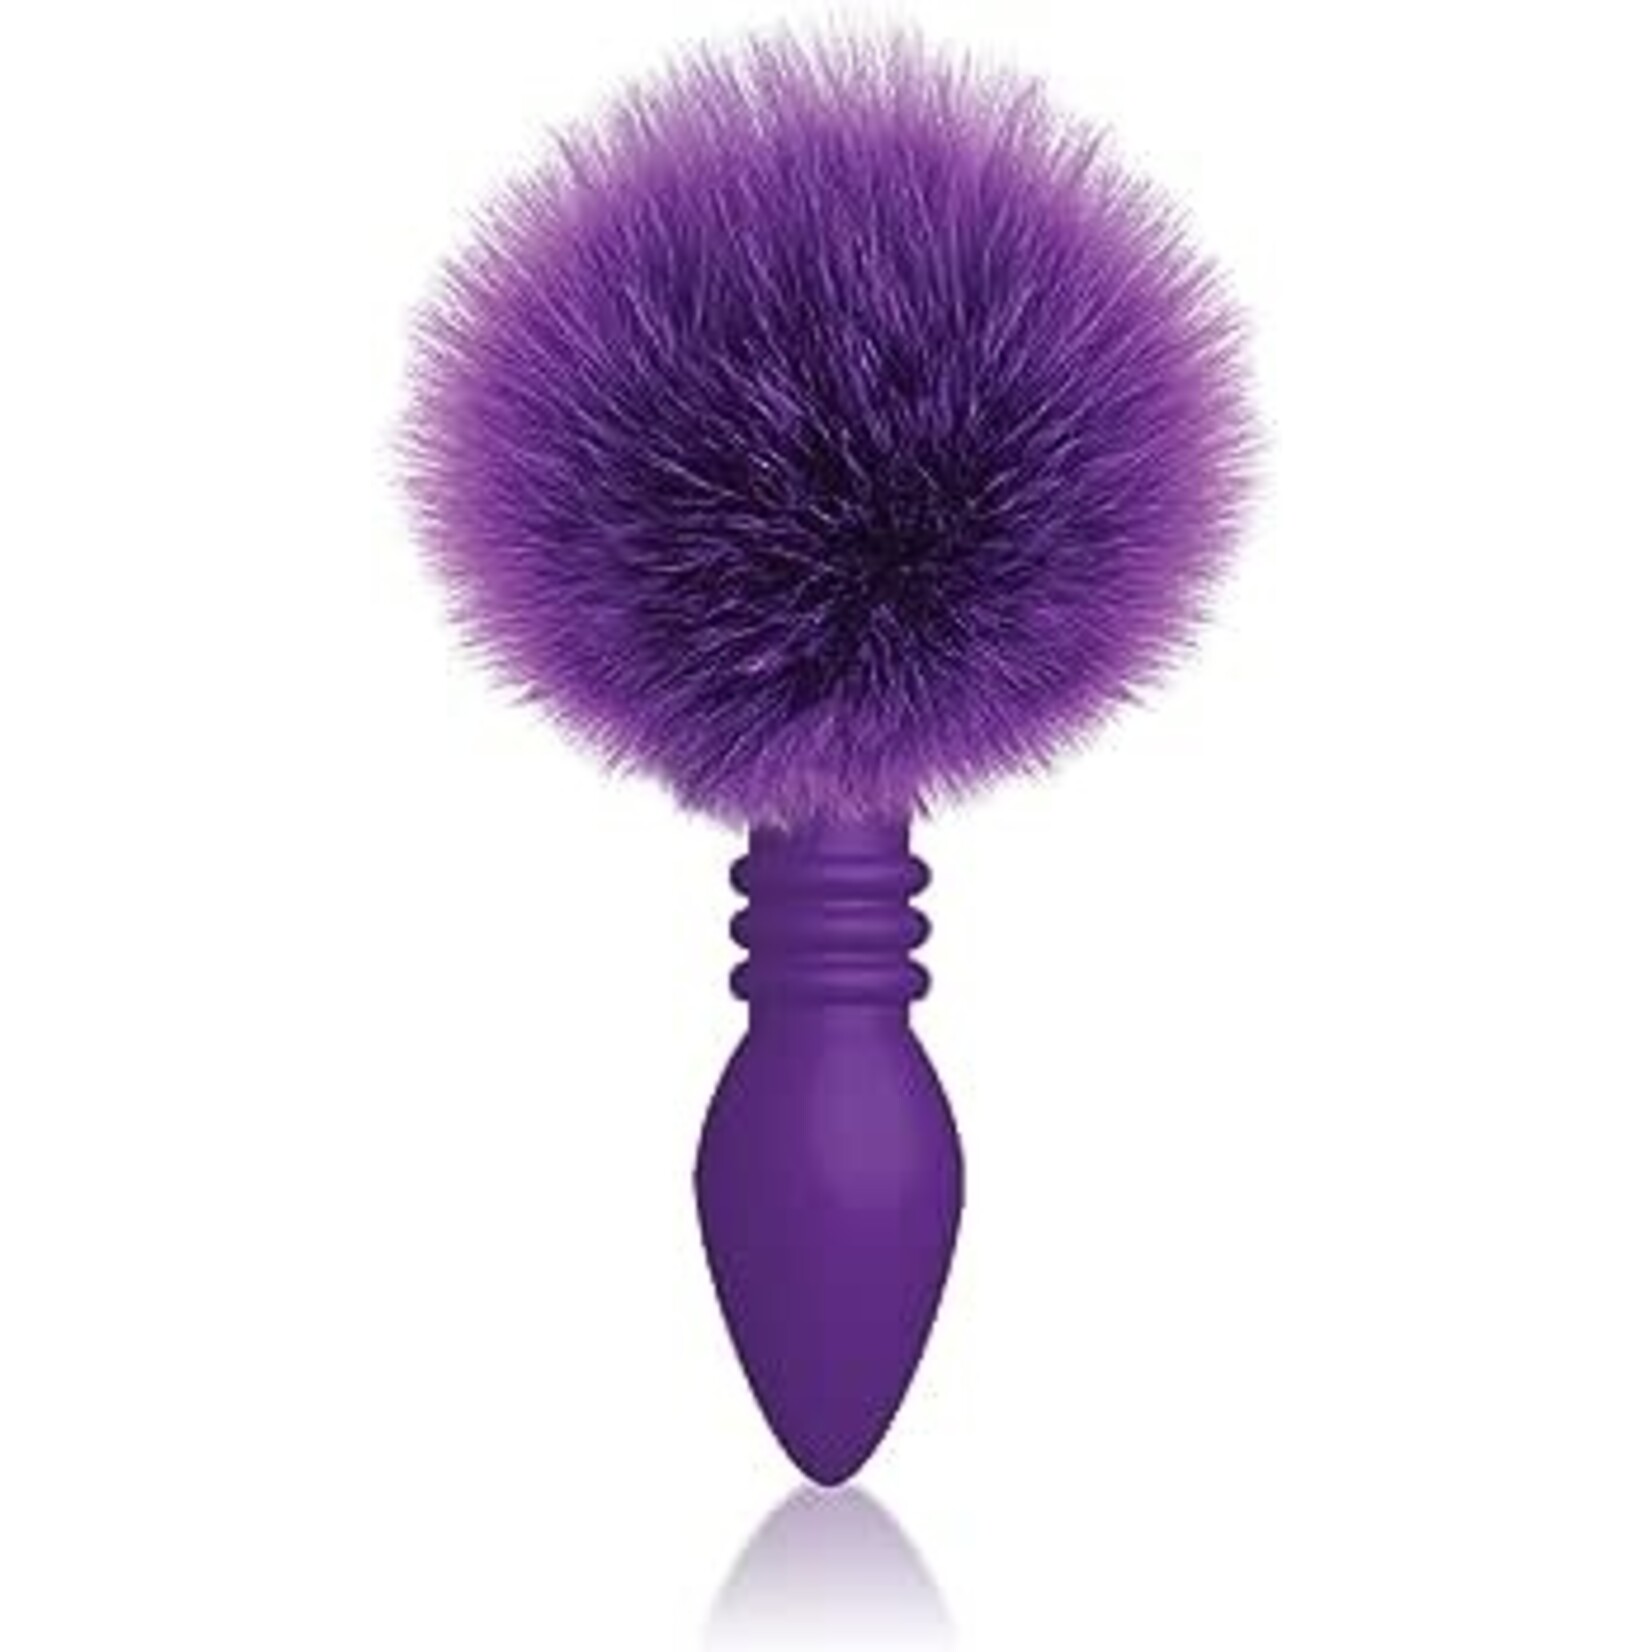 COTTONTAILS SILICONE BUNNY TAIL BUTT PLUG RIBBED PURPLE